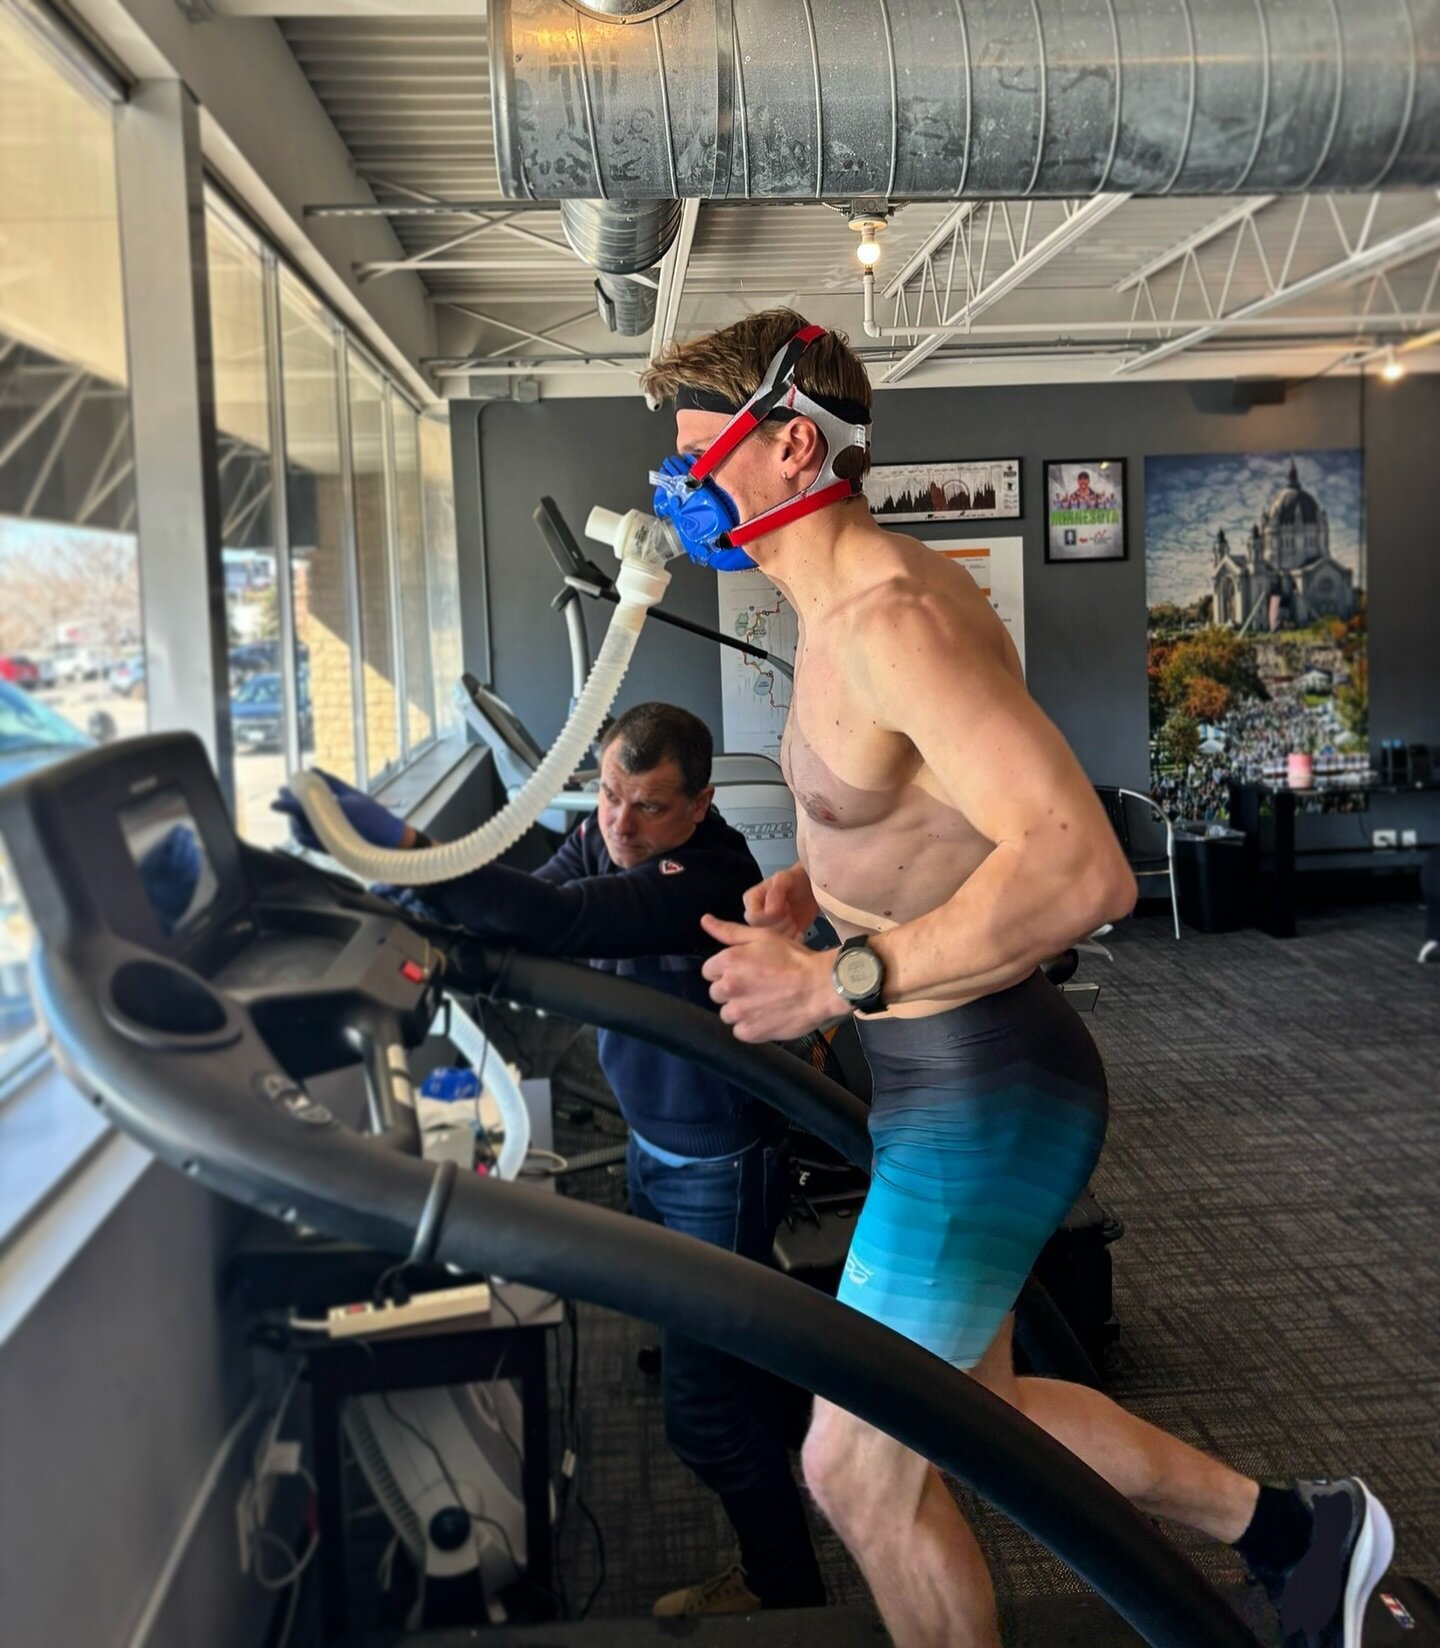 Metabolic testing day with @teambirkie ✅ Thank you @performancerungym for hosting us 🏃🏼&zwj;♂️
&bull;
#teambirkie #running #minneapolis #fitness